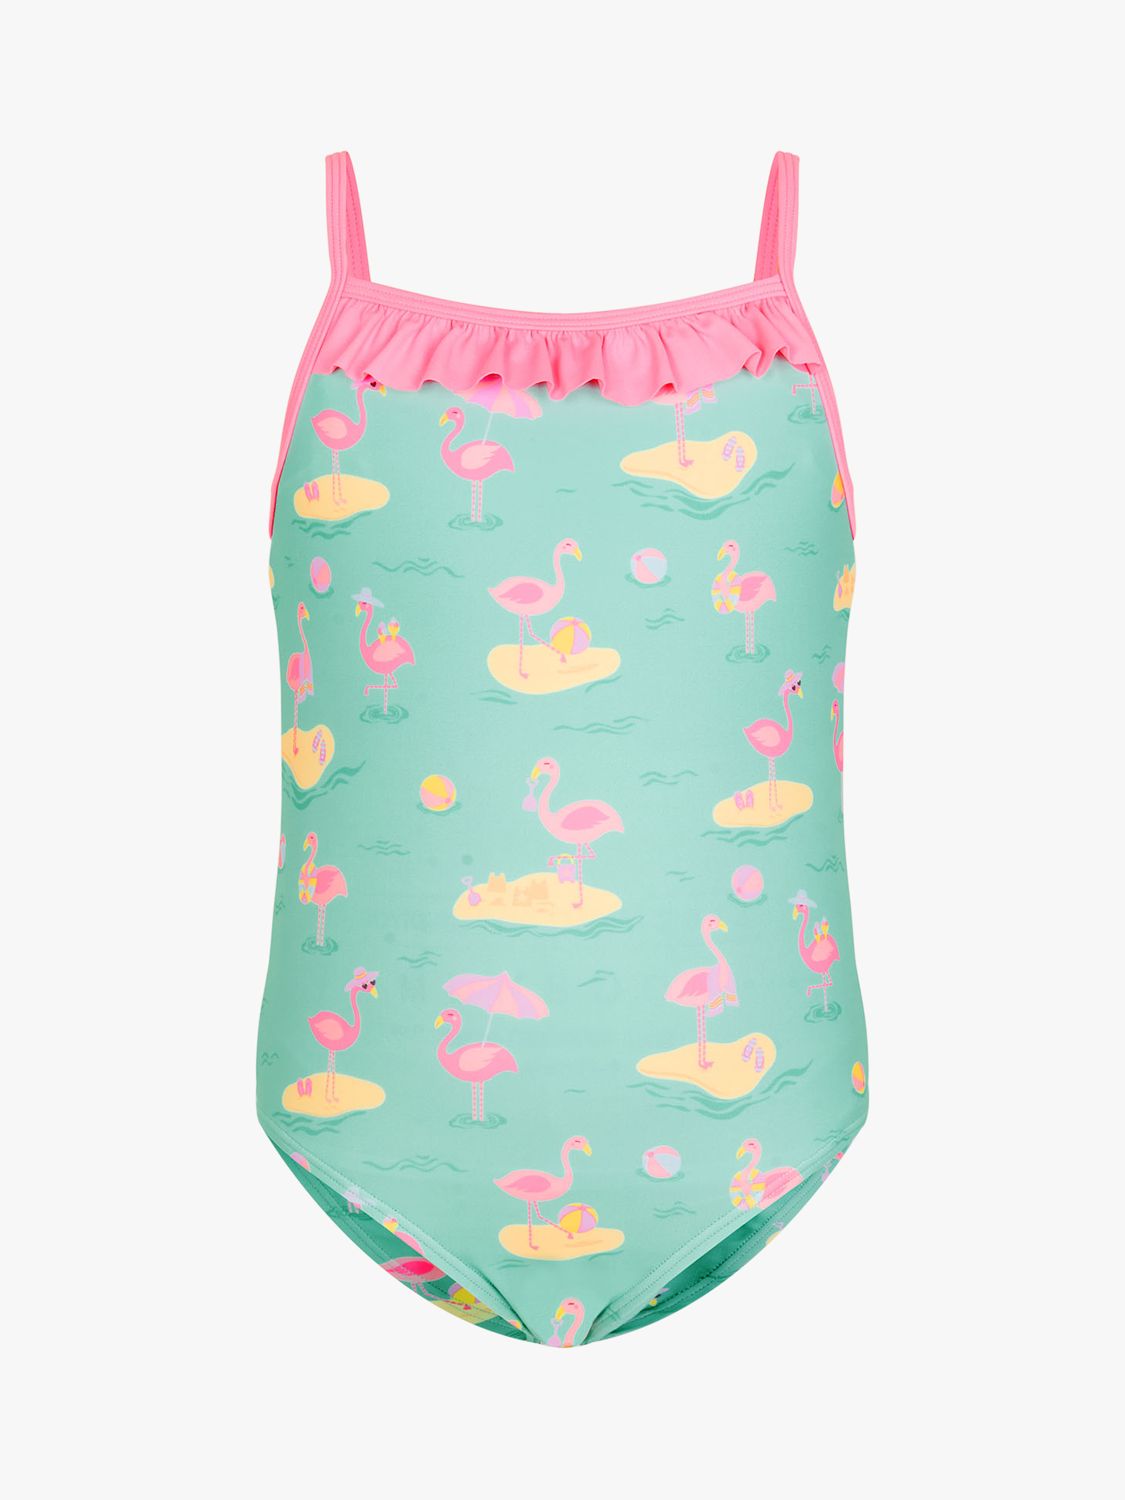 Angels by Accessorize Kids' Flamingo Print Swimsuit, Green/Multi, 5-6 years